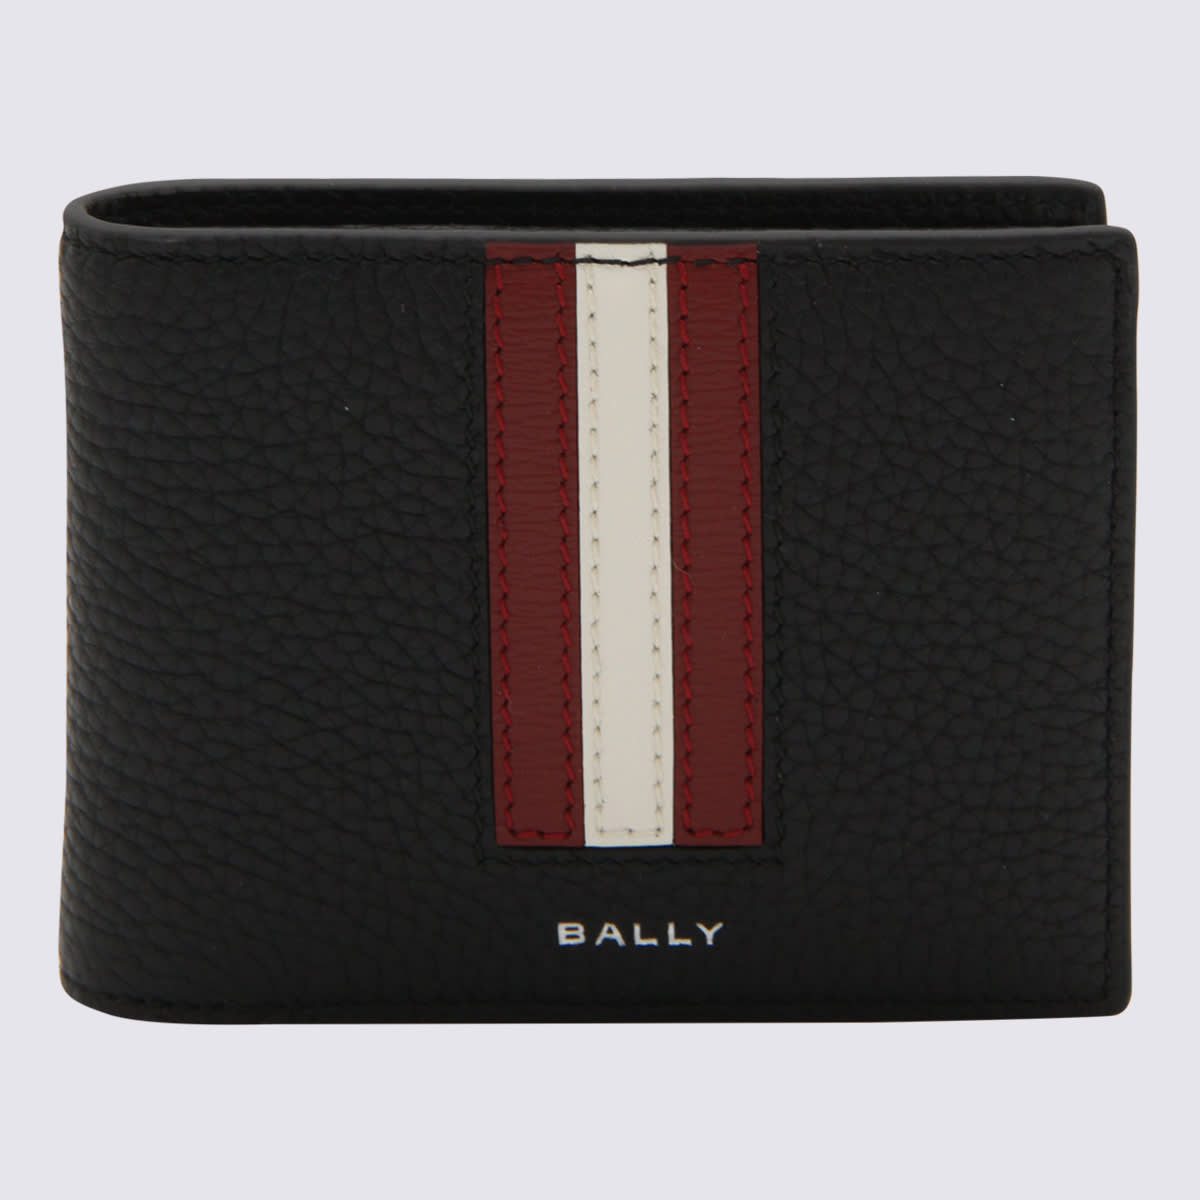 Bally Black Leather Wallet In Black/red+pall